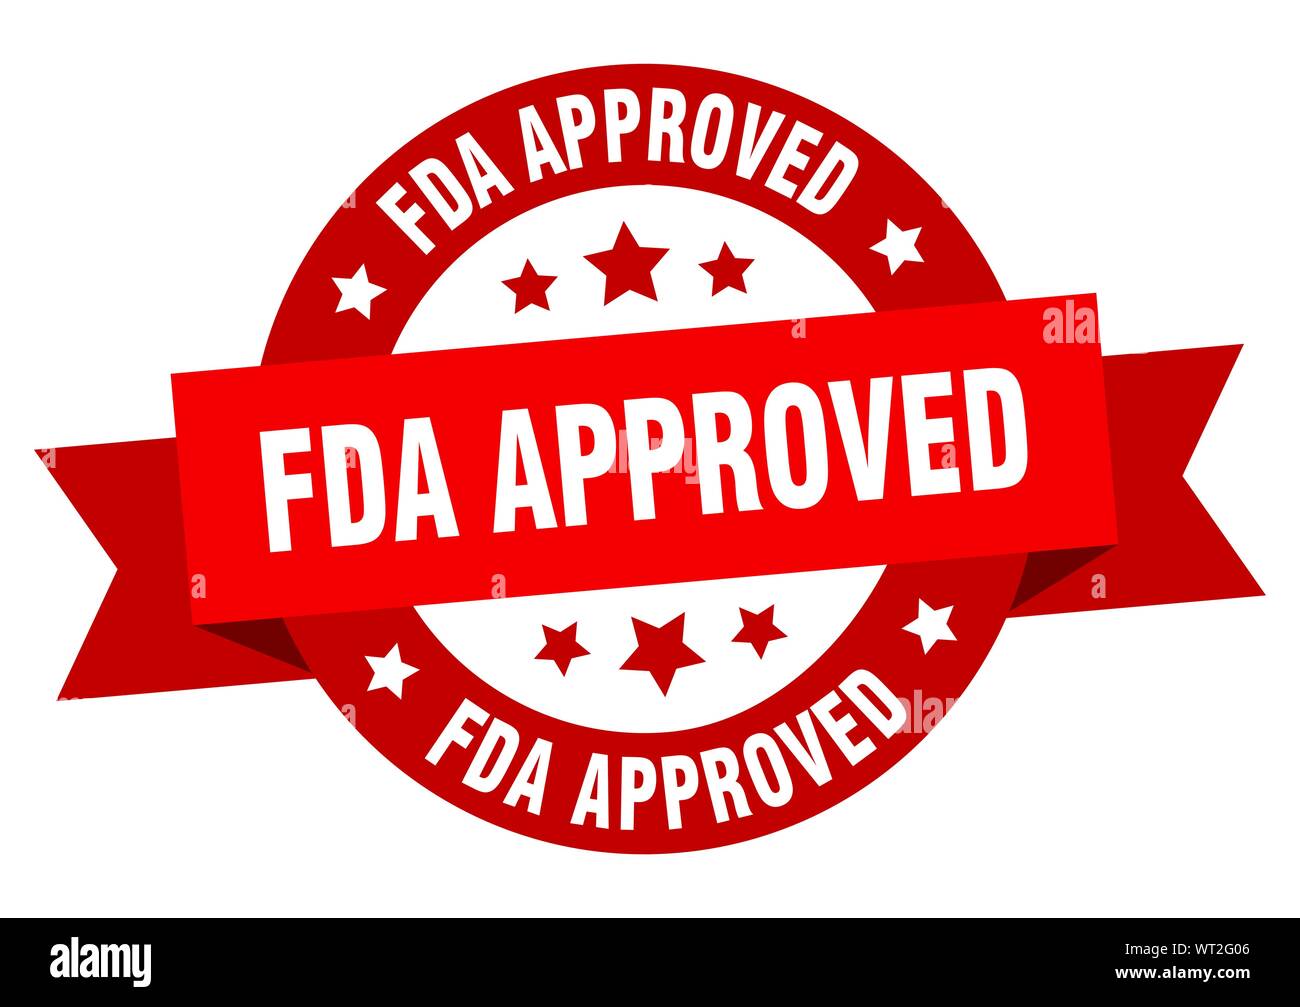 Fda Approved Ribbon Fda Approved Round Red Sign Fda Approved Stock Vector Image Art Alamy Fda approved logo png is a totally free png image with transparent background and its resolution is 600x342. https www alamy com fda approved ribbon fda approved round red sign fda approved image272963718 html